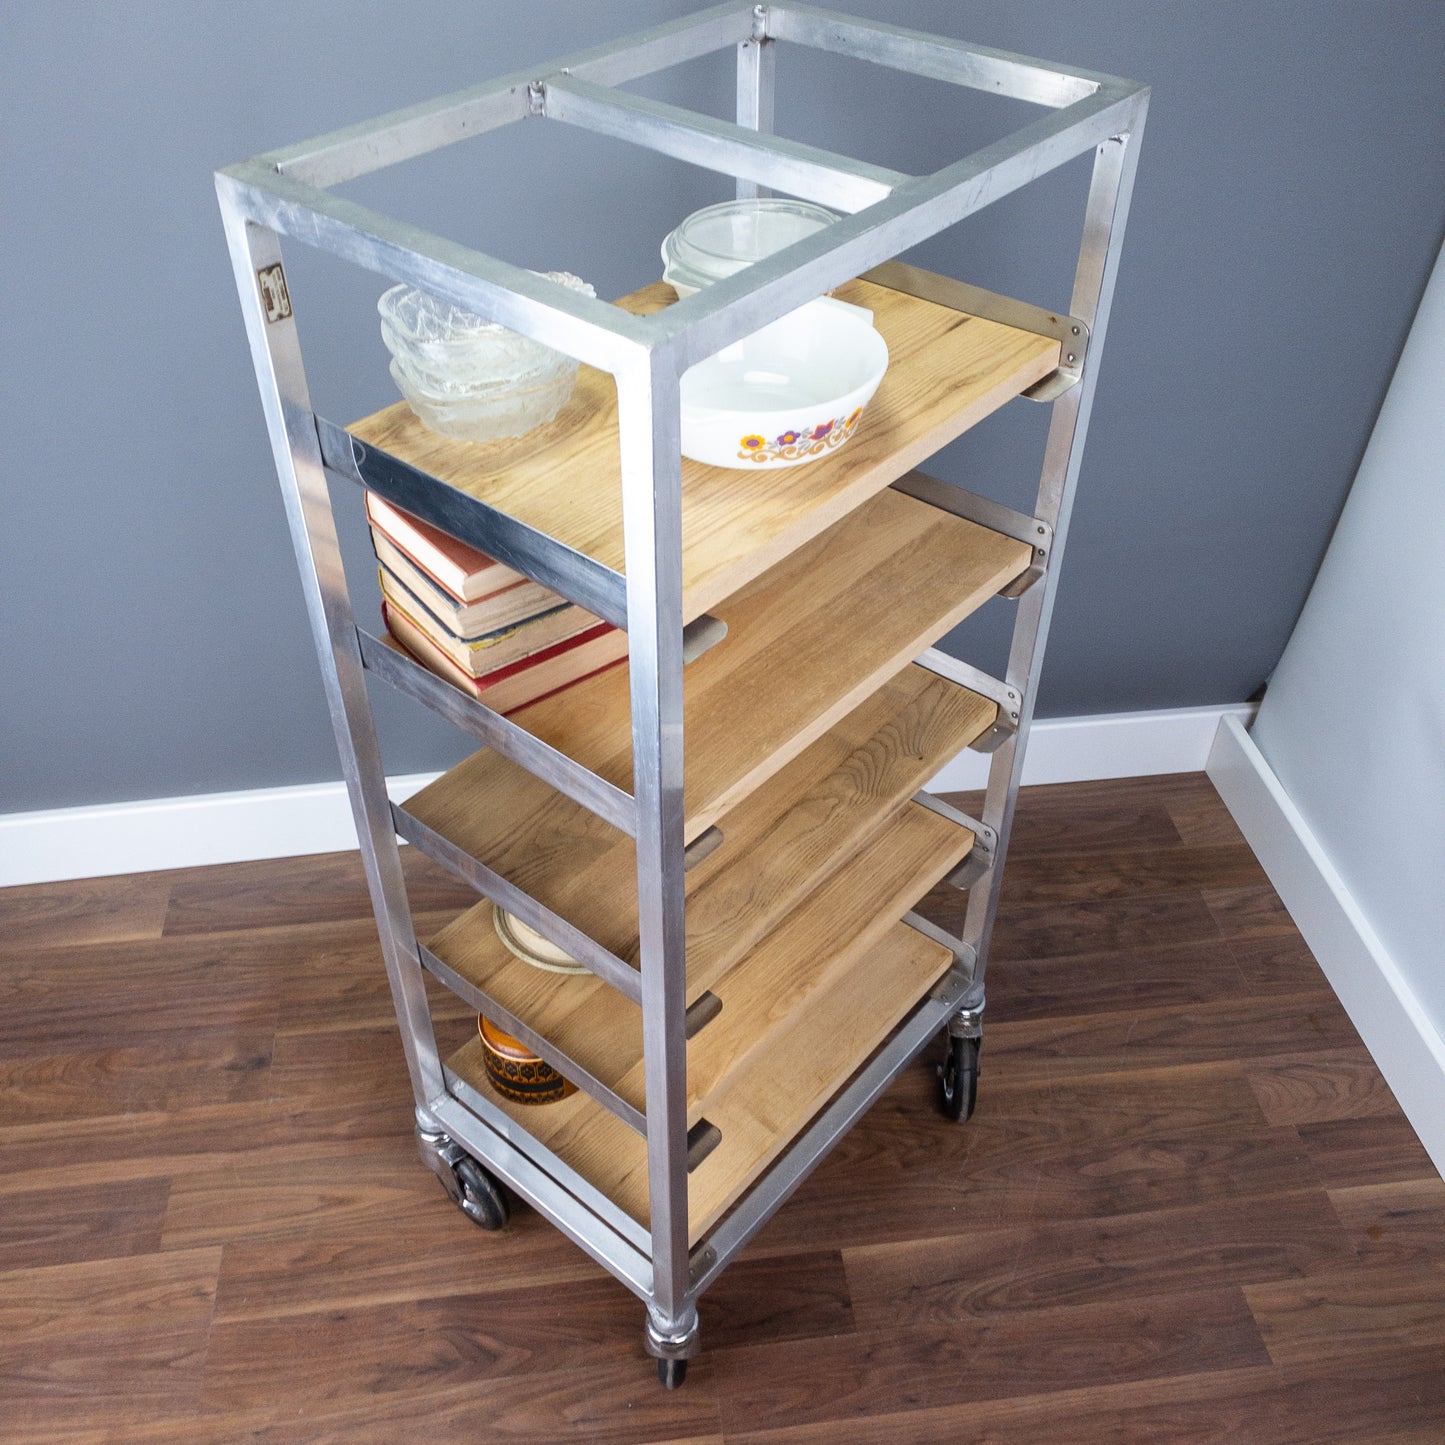 Vintage wheeled bakers trolley with bespoke shelving